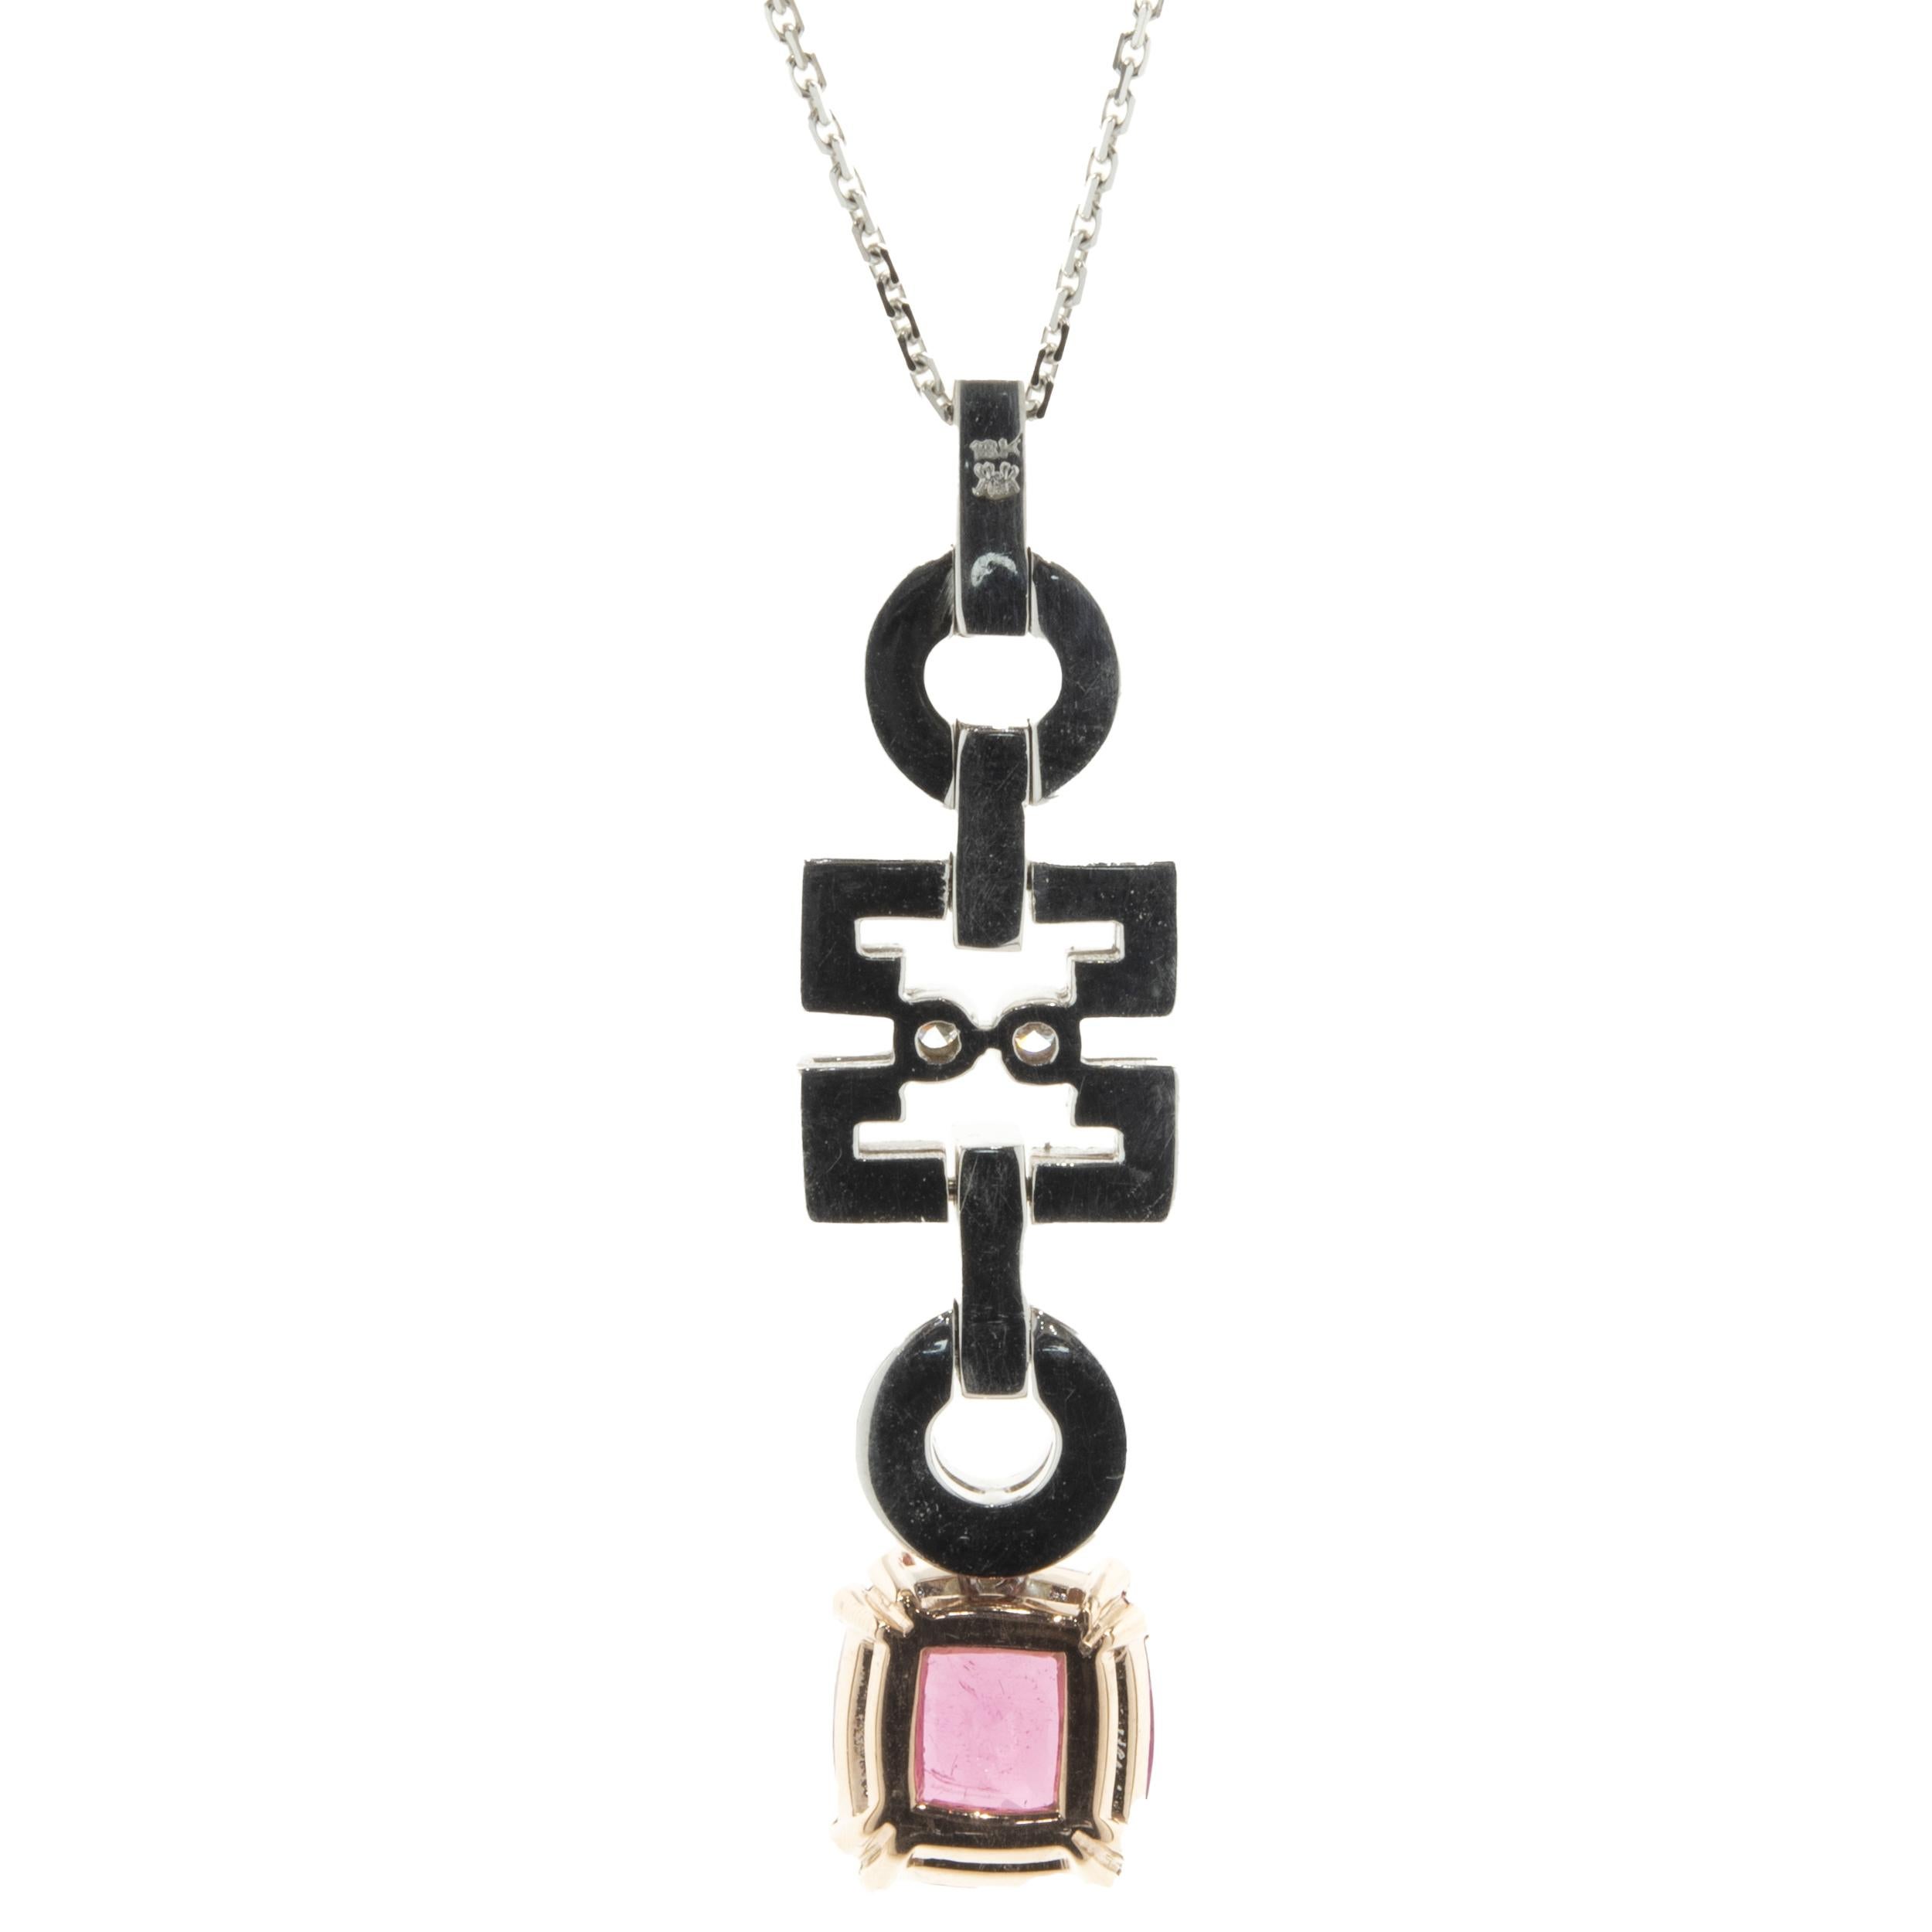 Designer: custom
Material: 18K white & rose gold
Diamond: round brilliant cut = .60cttw
Color: G
Clarity: VS2
Pink Tourmaline: cushion cut = 5.09ct
Dimensions: necklace measures 18-inches in length
Weight: 13.23 grams